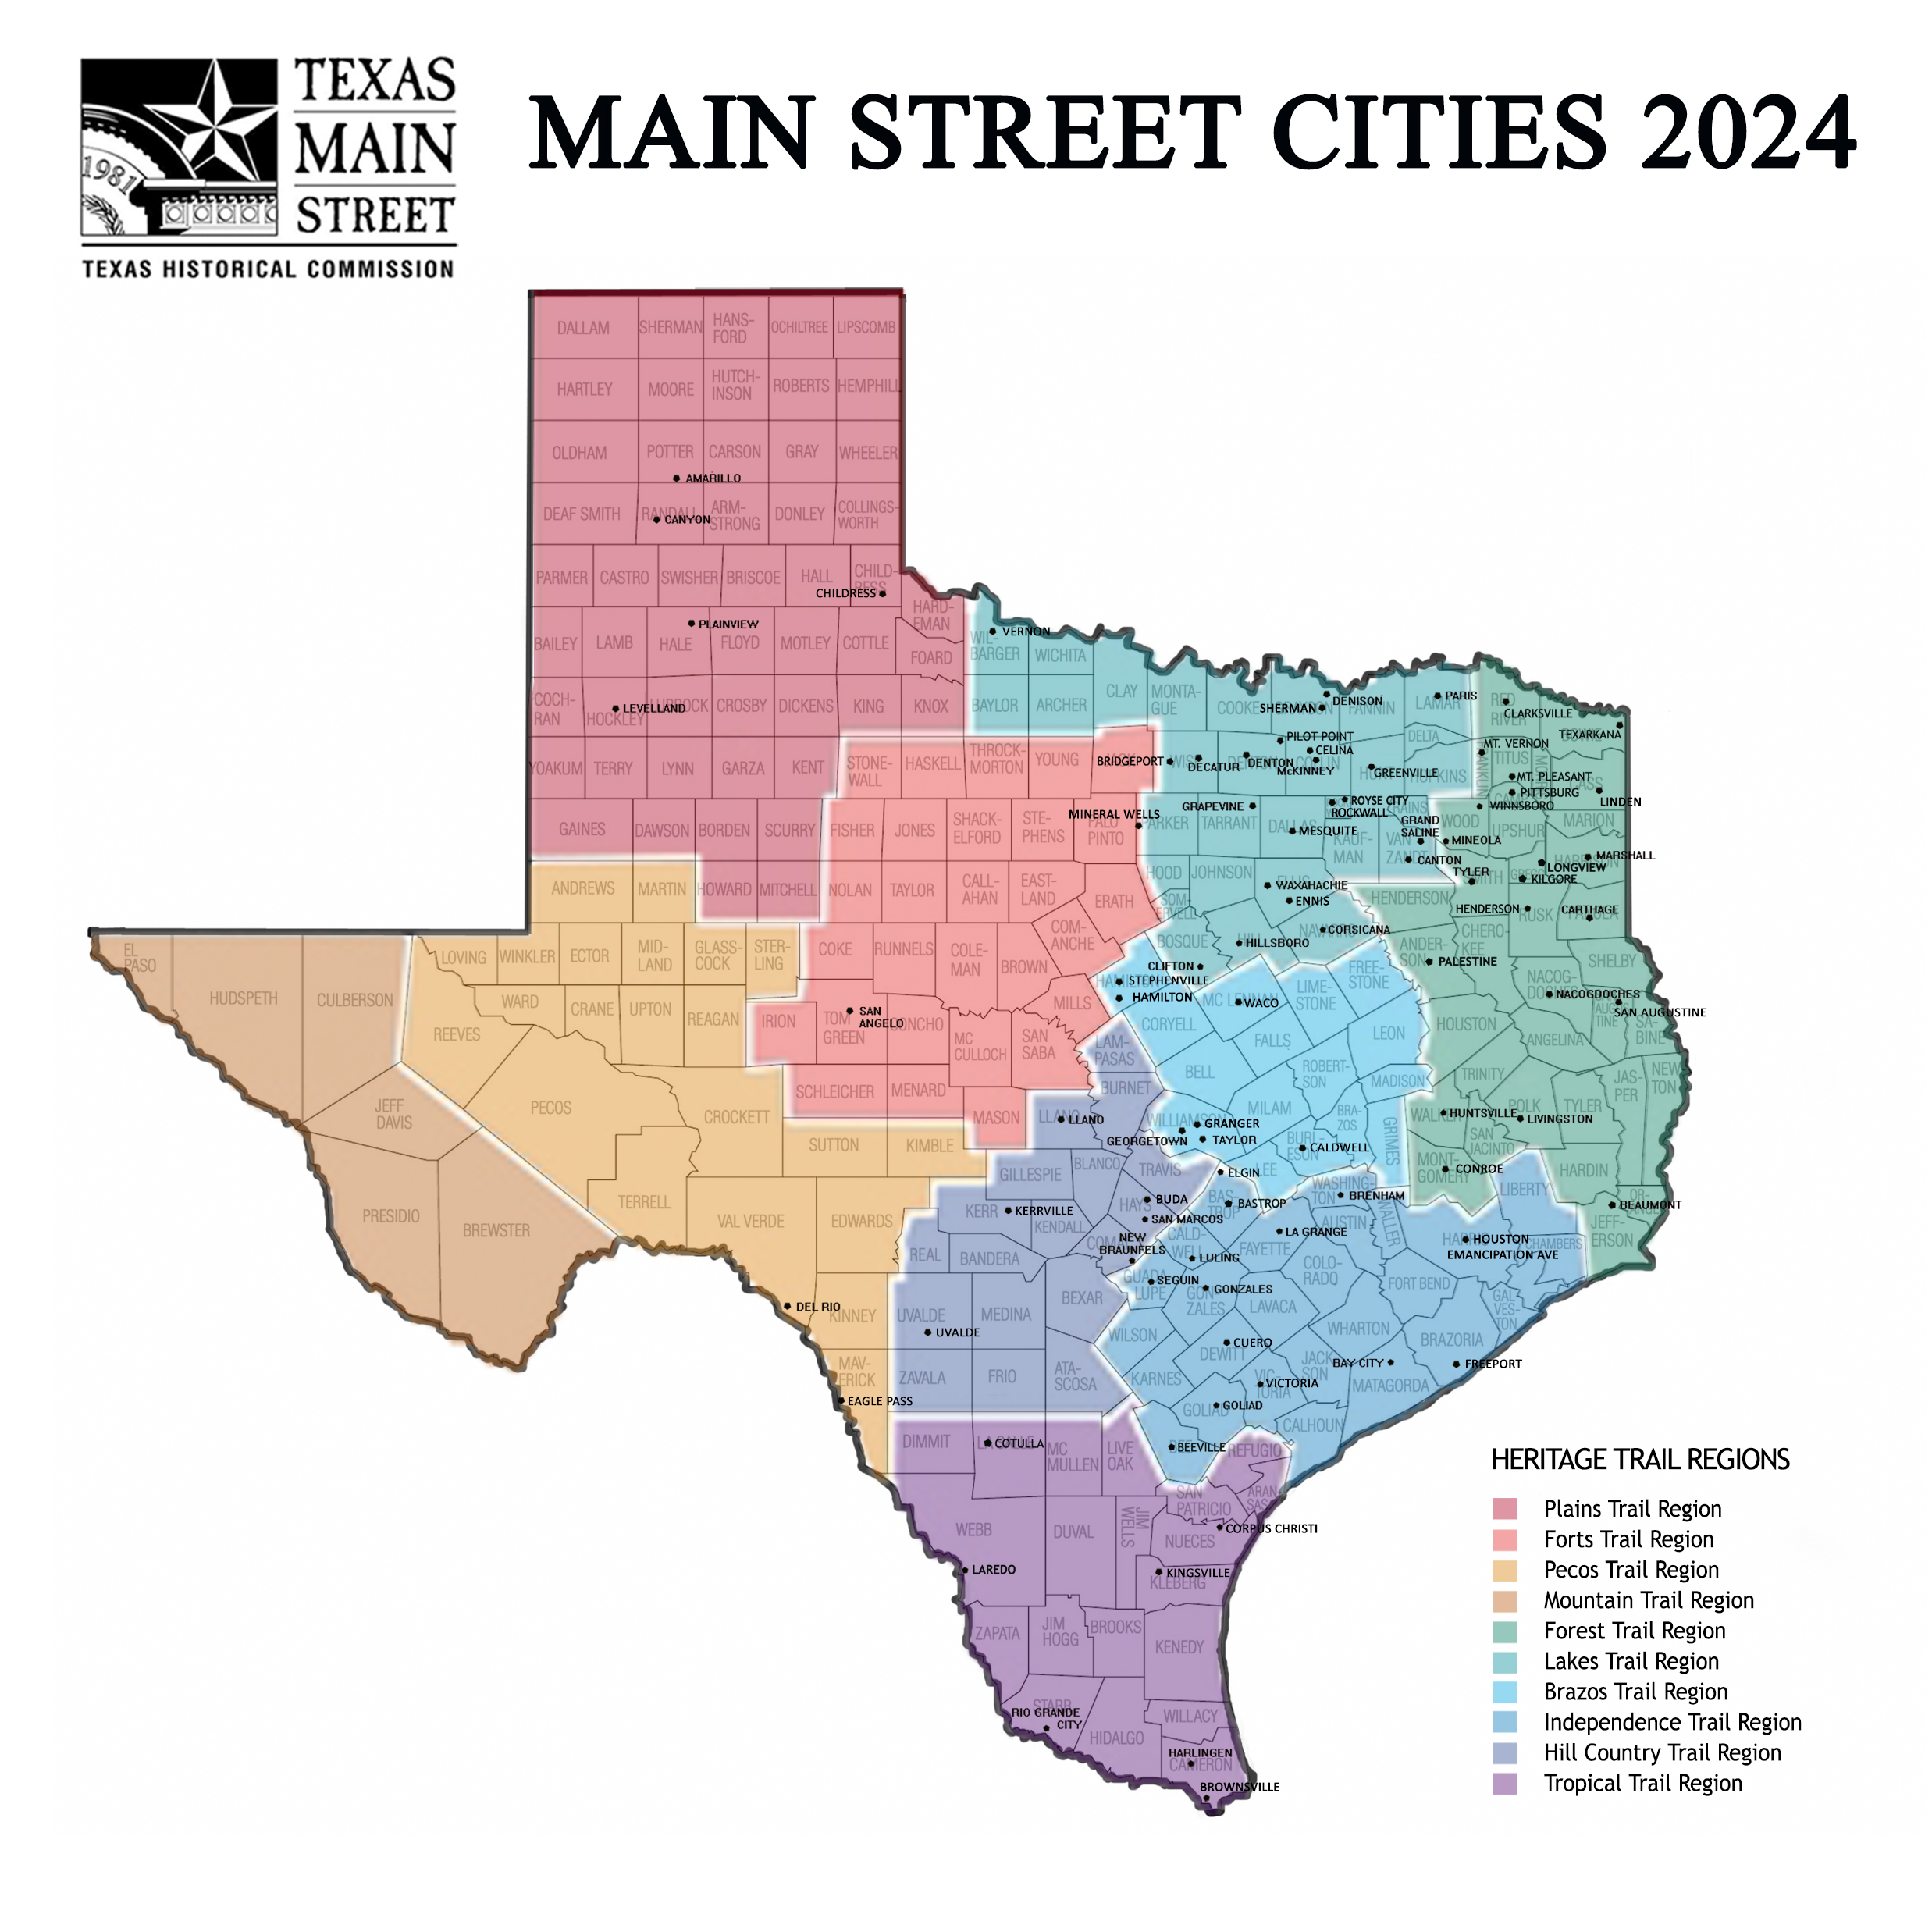 A map of participating cities in the Texas Main Street Program